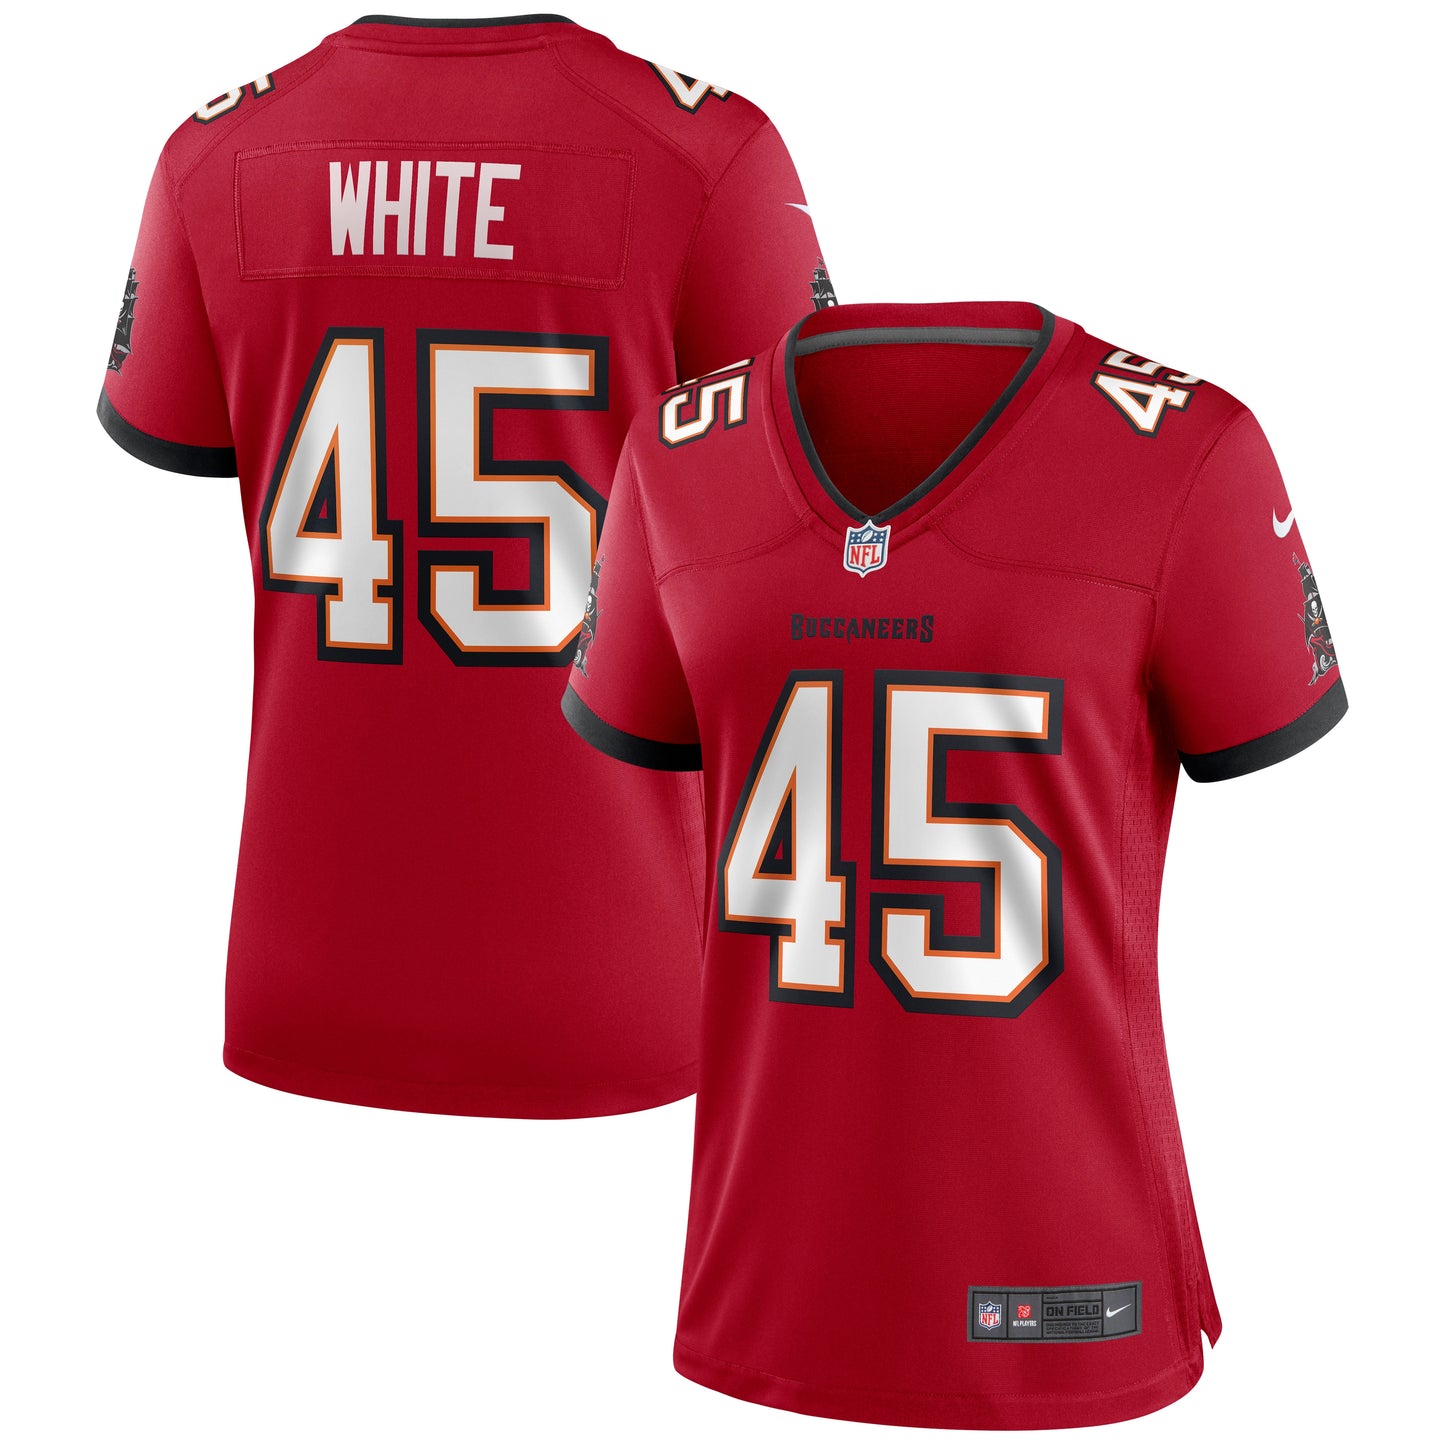 Devin White Tampa Bay Buccaneers Nike Women's Game Jersey - Red